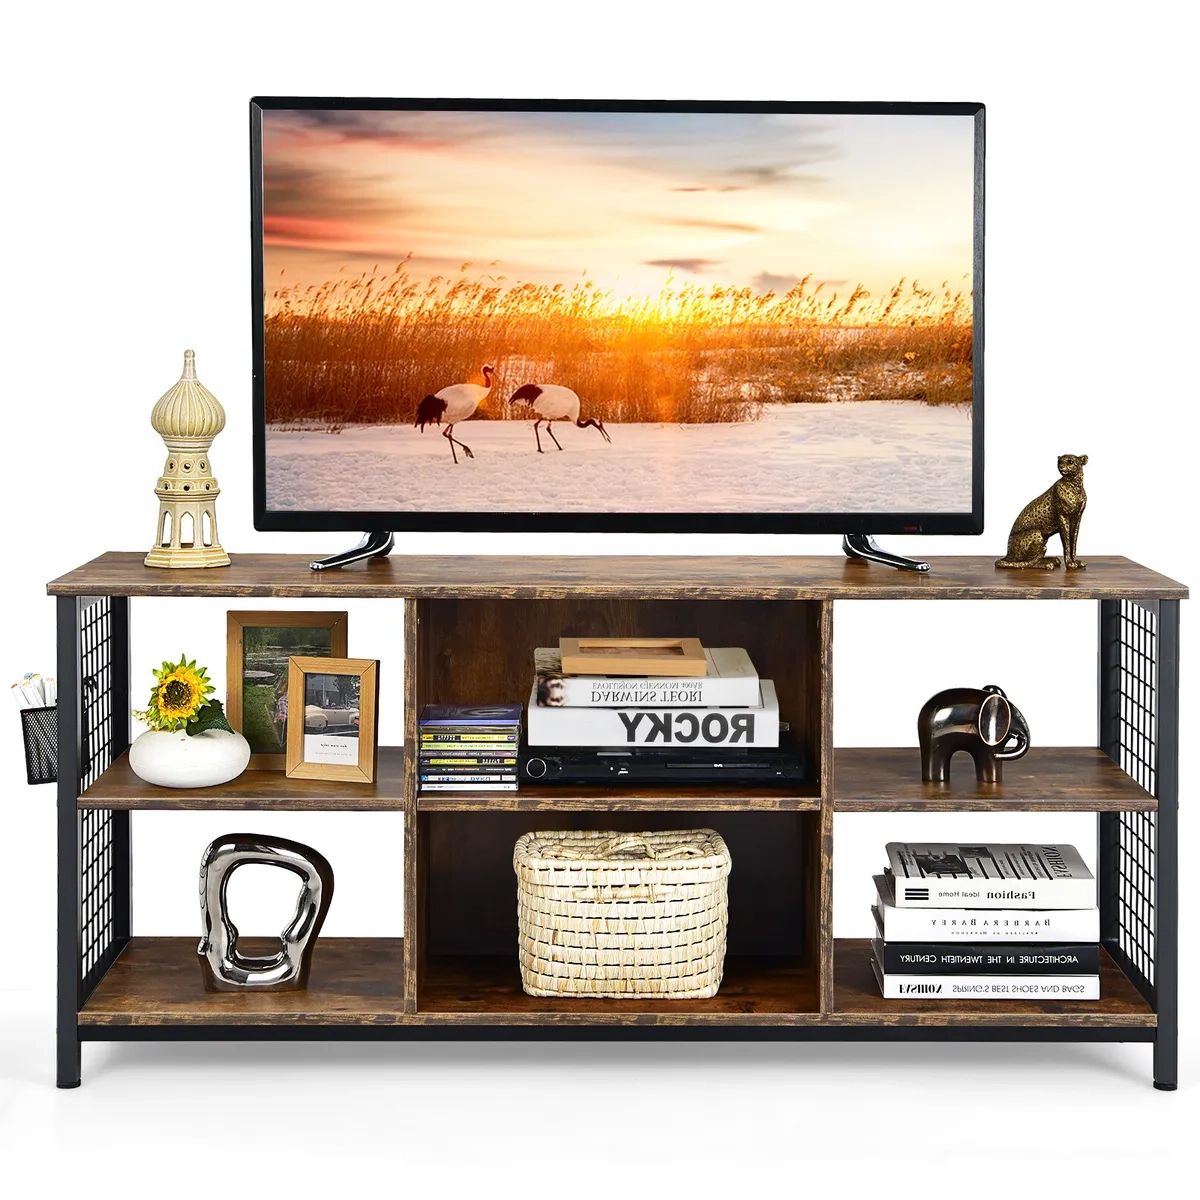 Entertainment Media Center 3 Tier Tv Stand For Tv's Up To 65" W/storage  Basket | Ebay Intended For Tier Stands For Tvs (Gallery 3 of 20)